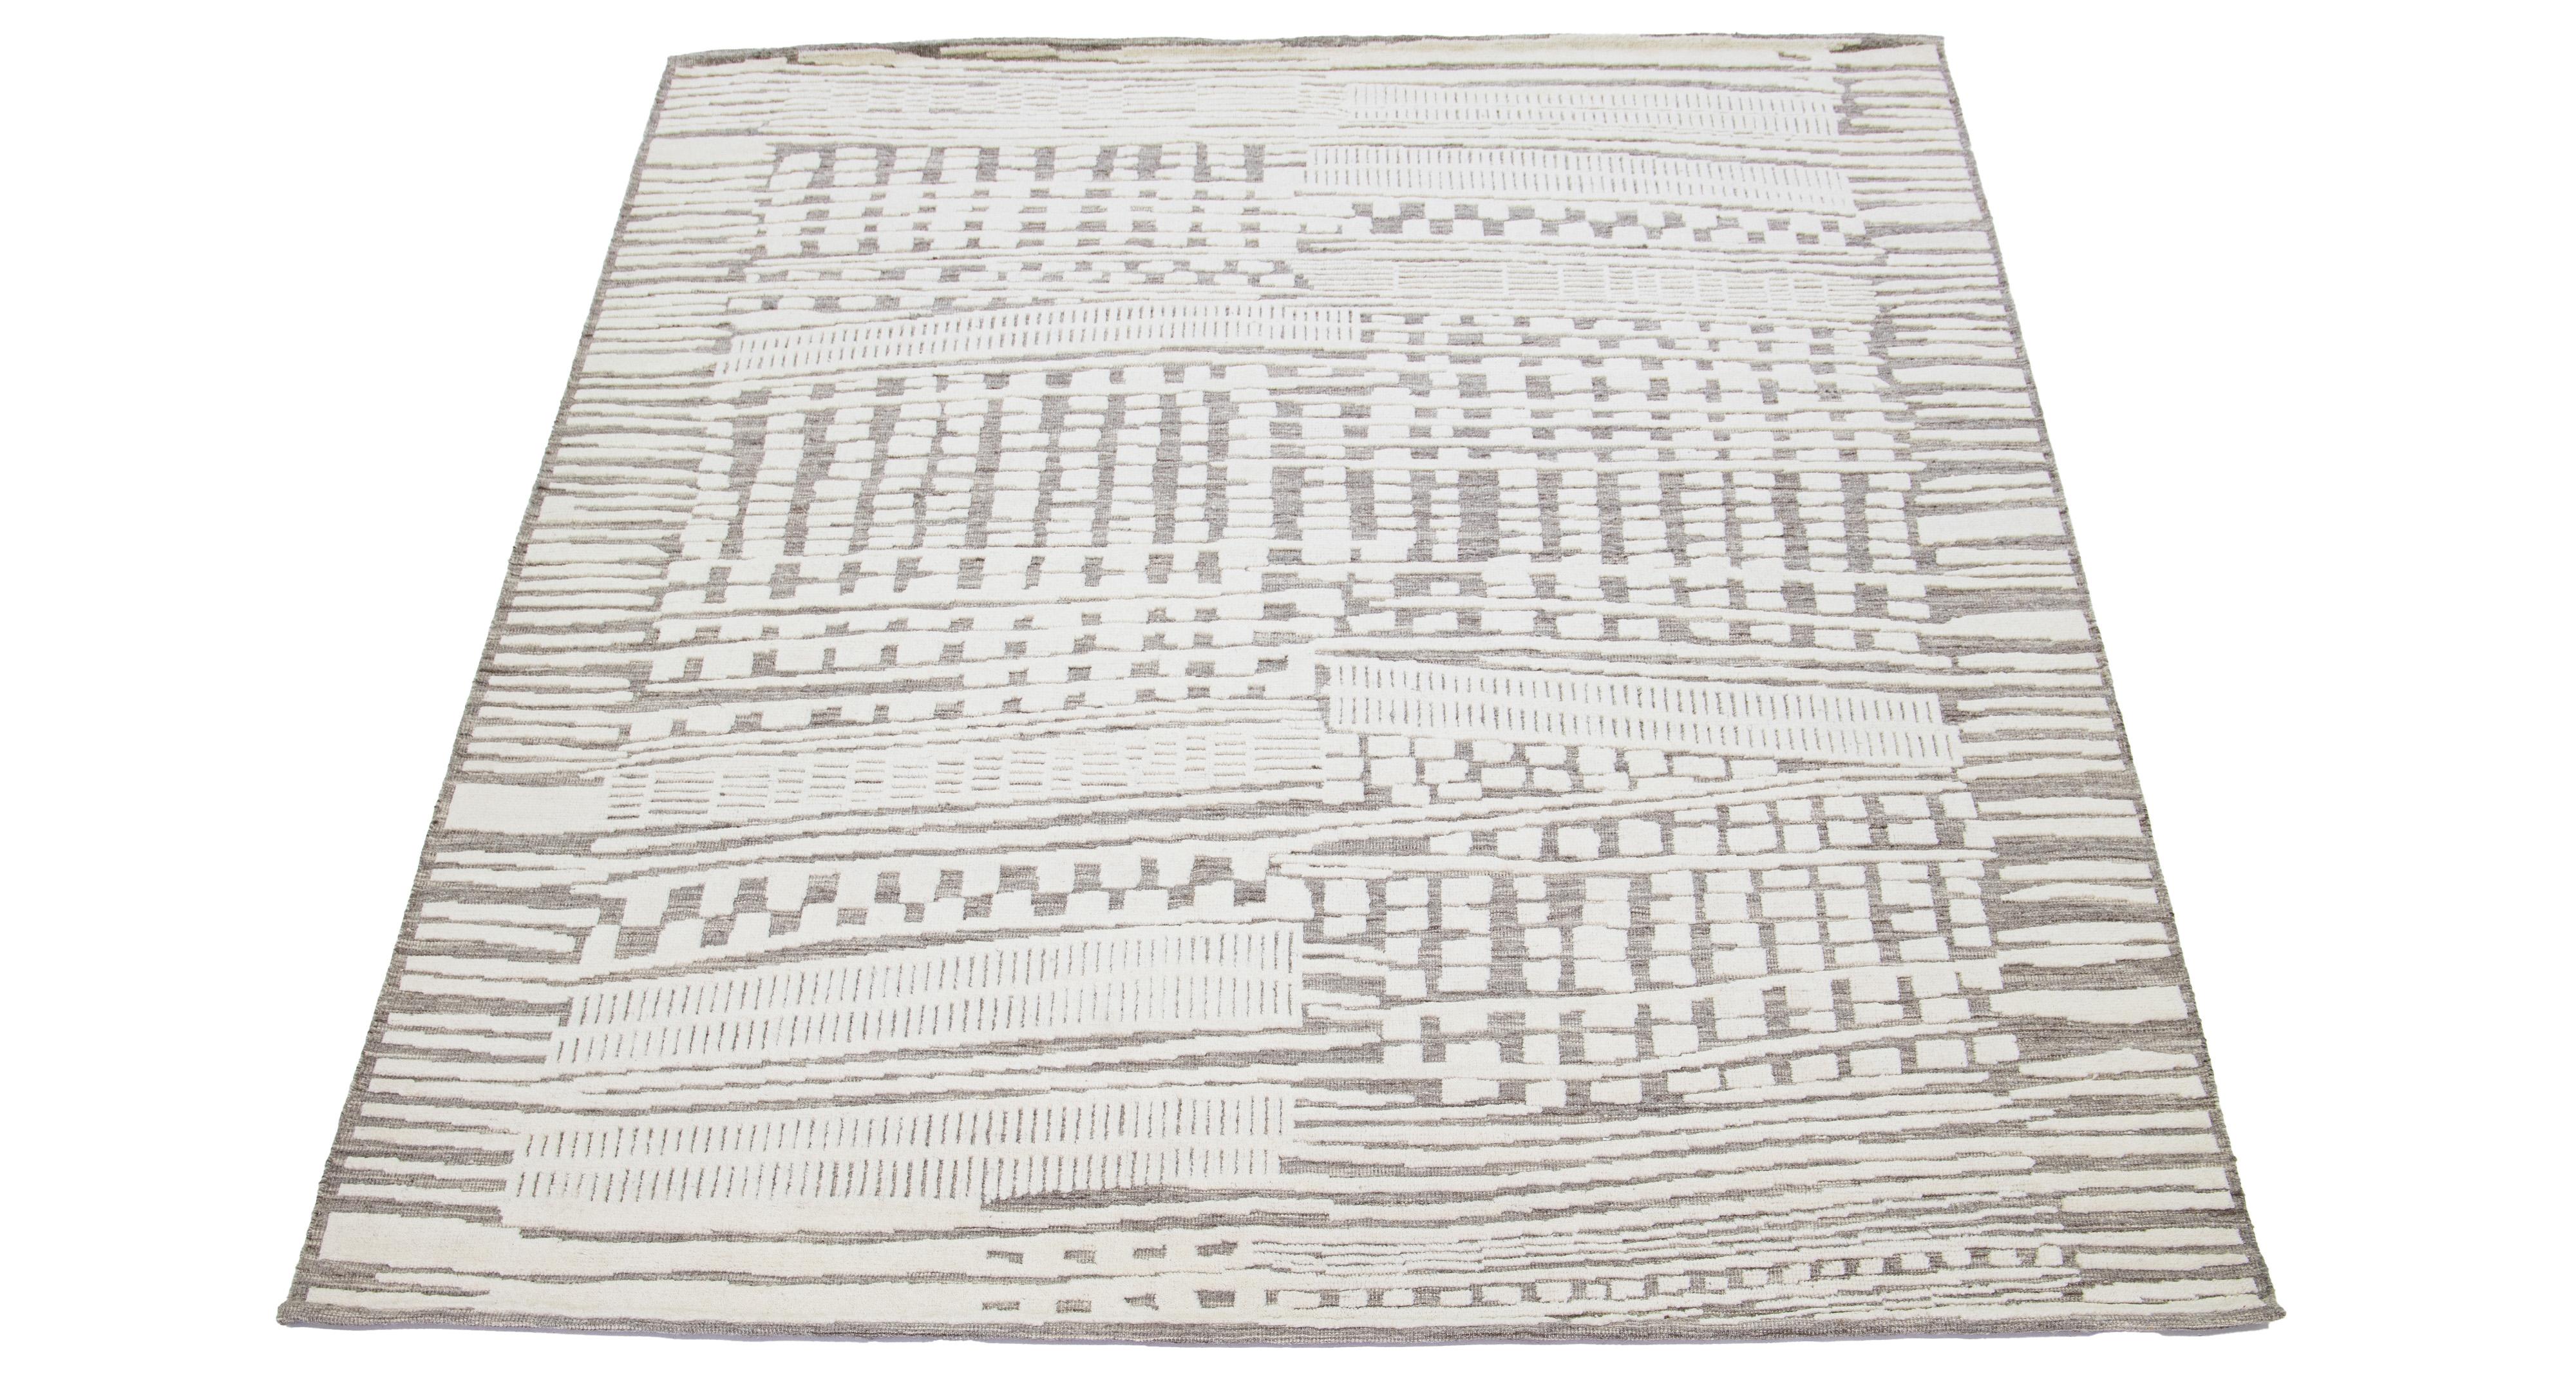 This hand-knotted wool rug showcases a modern Moroccan-inspired motif highlighting understated beige hues against a bold gray foundation, creating a captivating abstract Design.

This rug measures 8'1